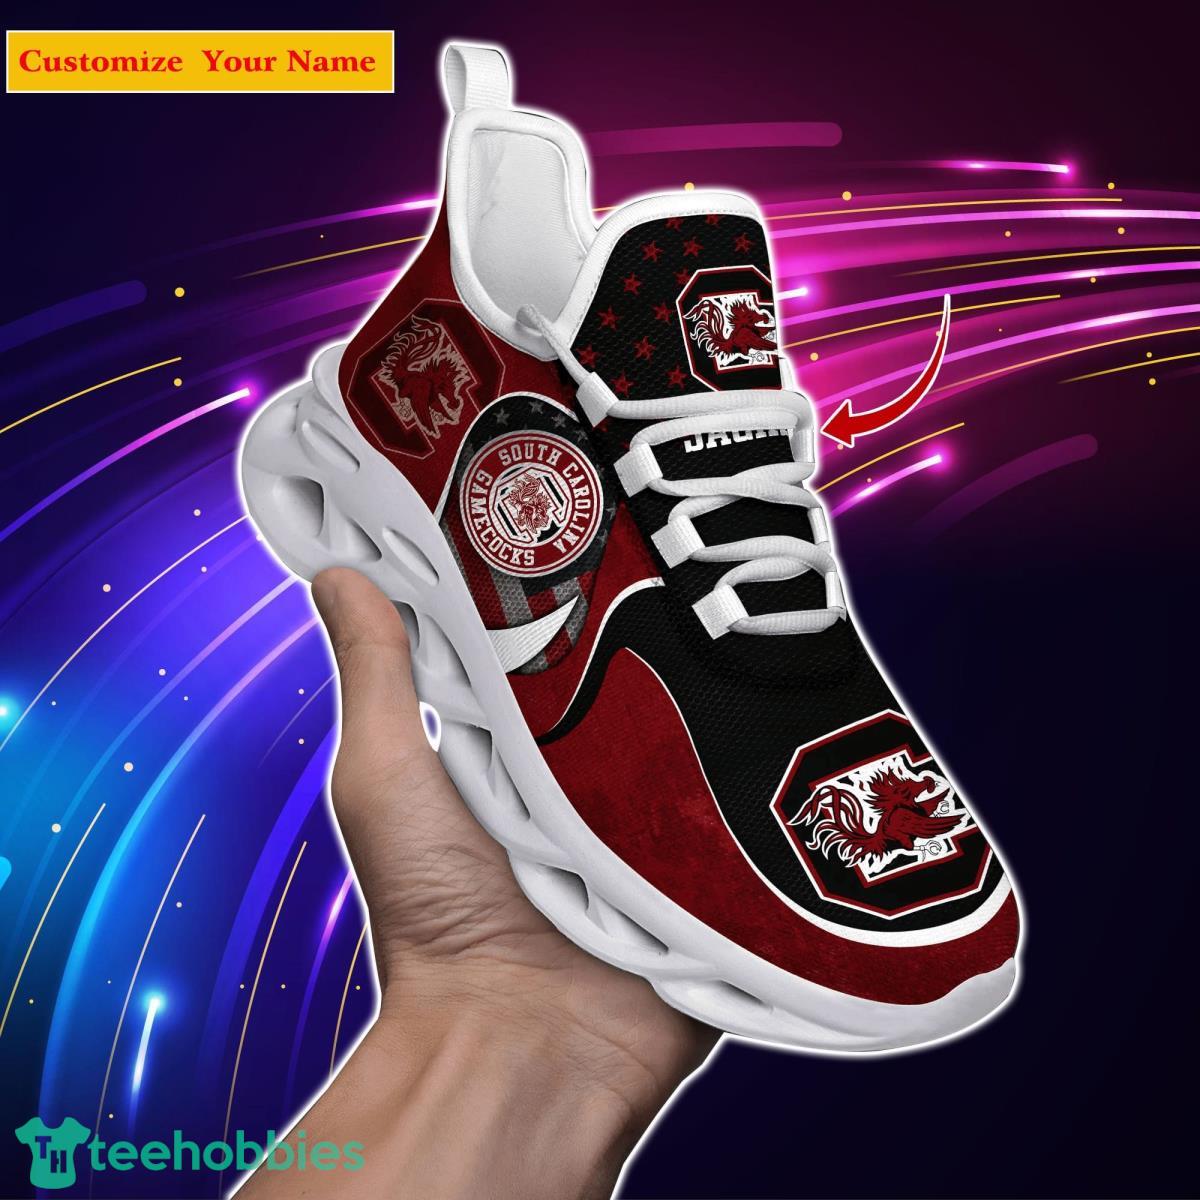 South Carolina Gamecocks NCAA1 Custom Name Max Soul Shoes Special Gift For Men Women Fans Product Photo 1